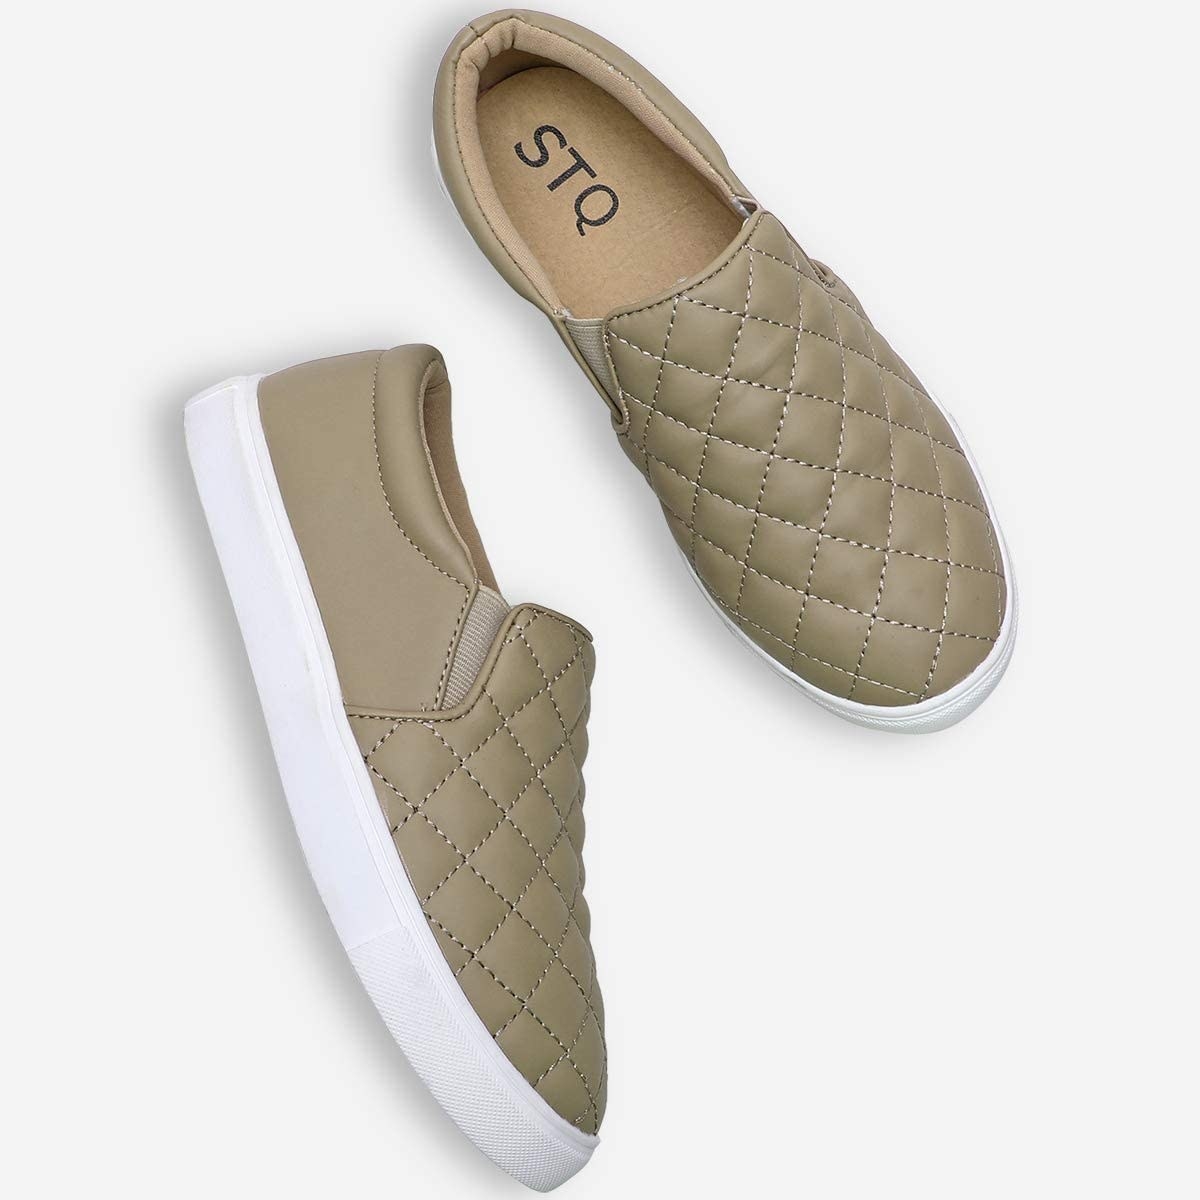 the quilted slip on sneakers in olive green